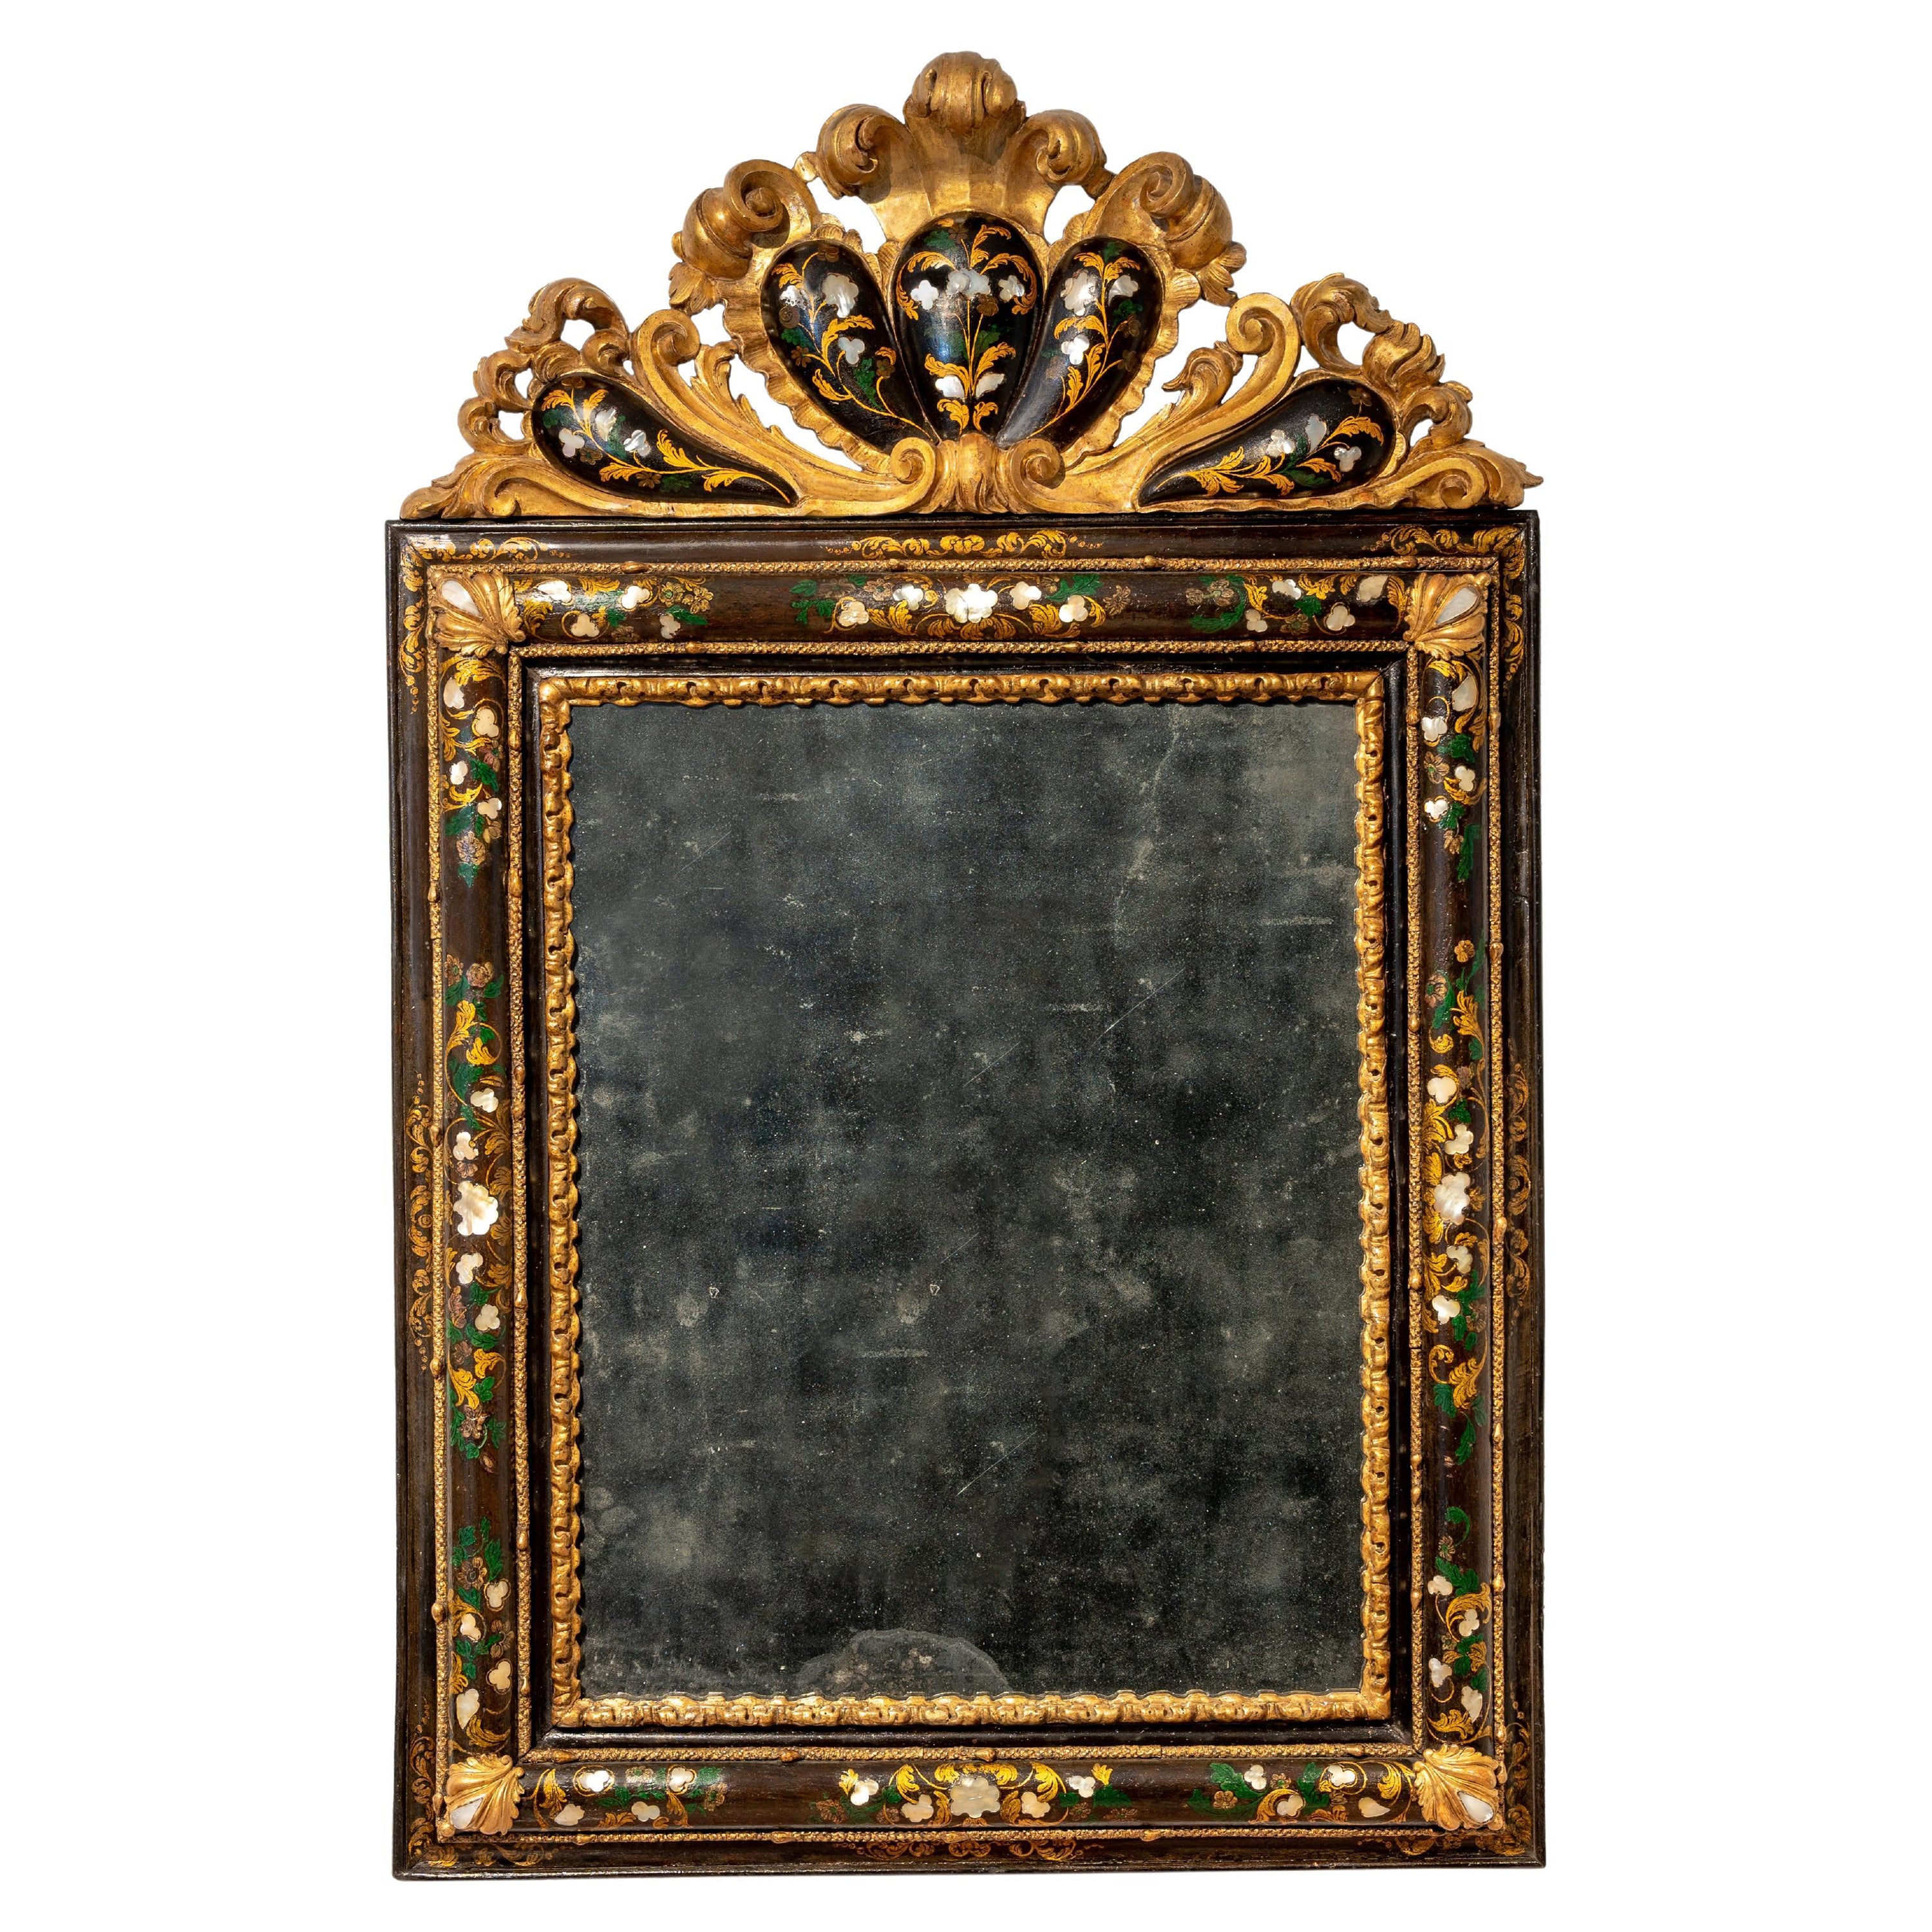 Mother-of-Pearl Wall Mirrors